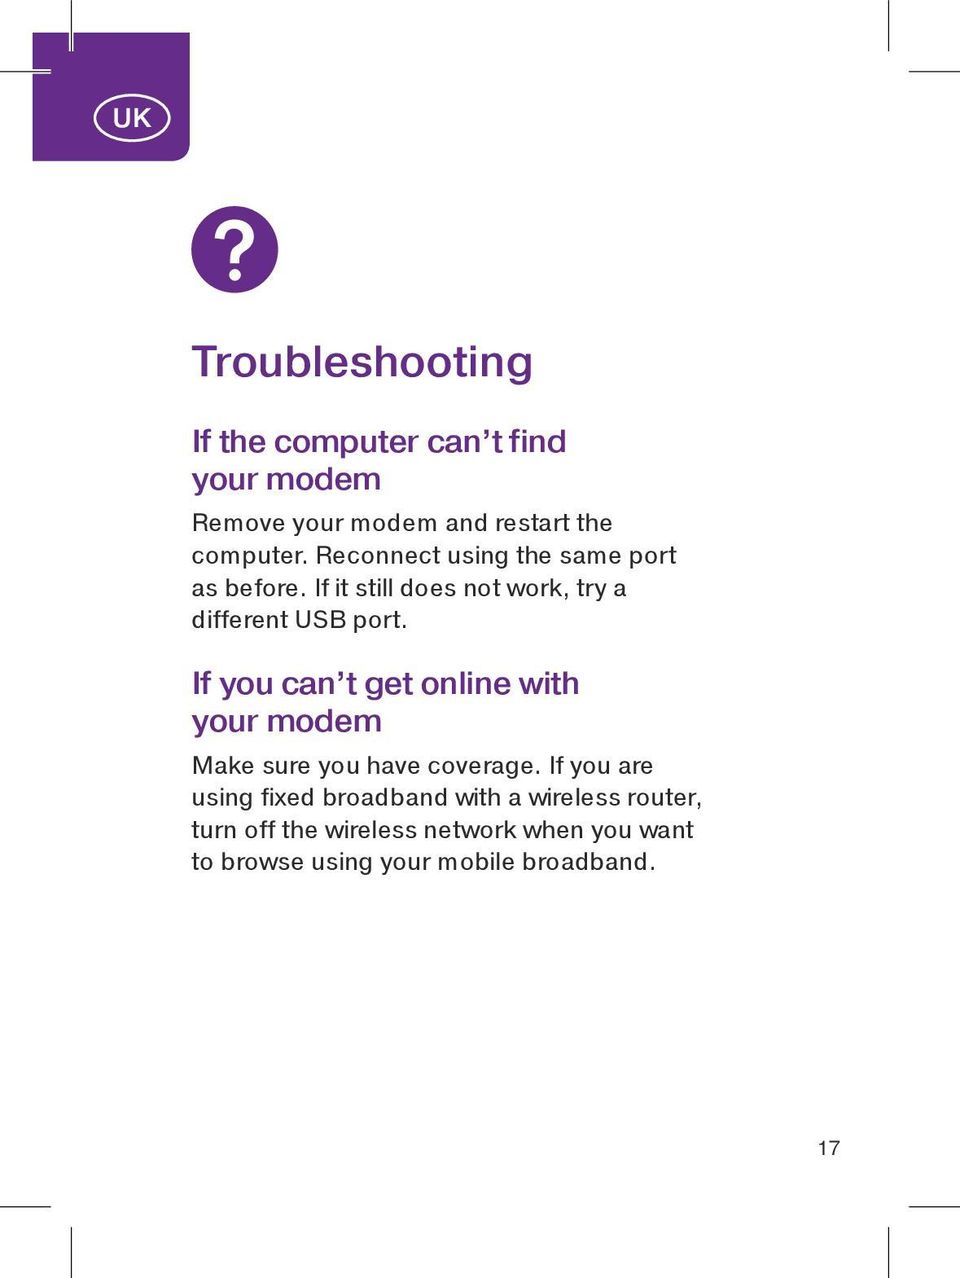 If you can t get online with your modem Make sure you have coverage.